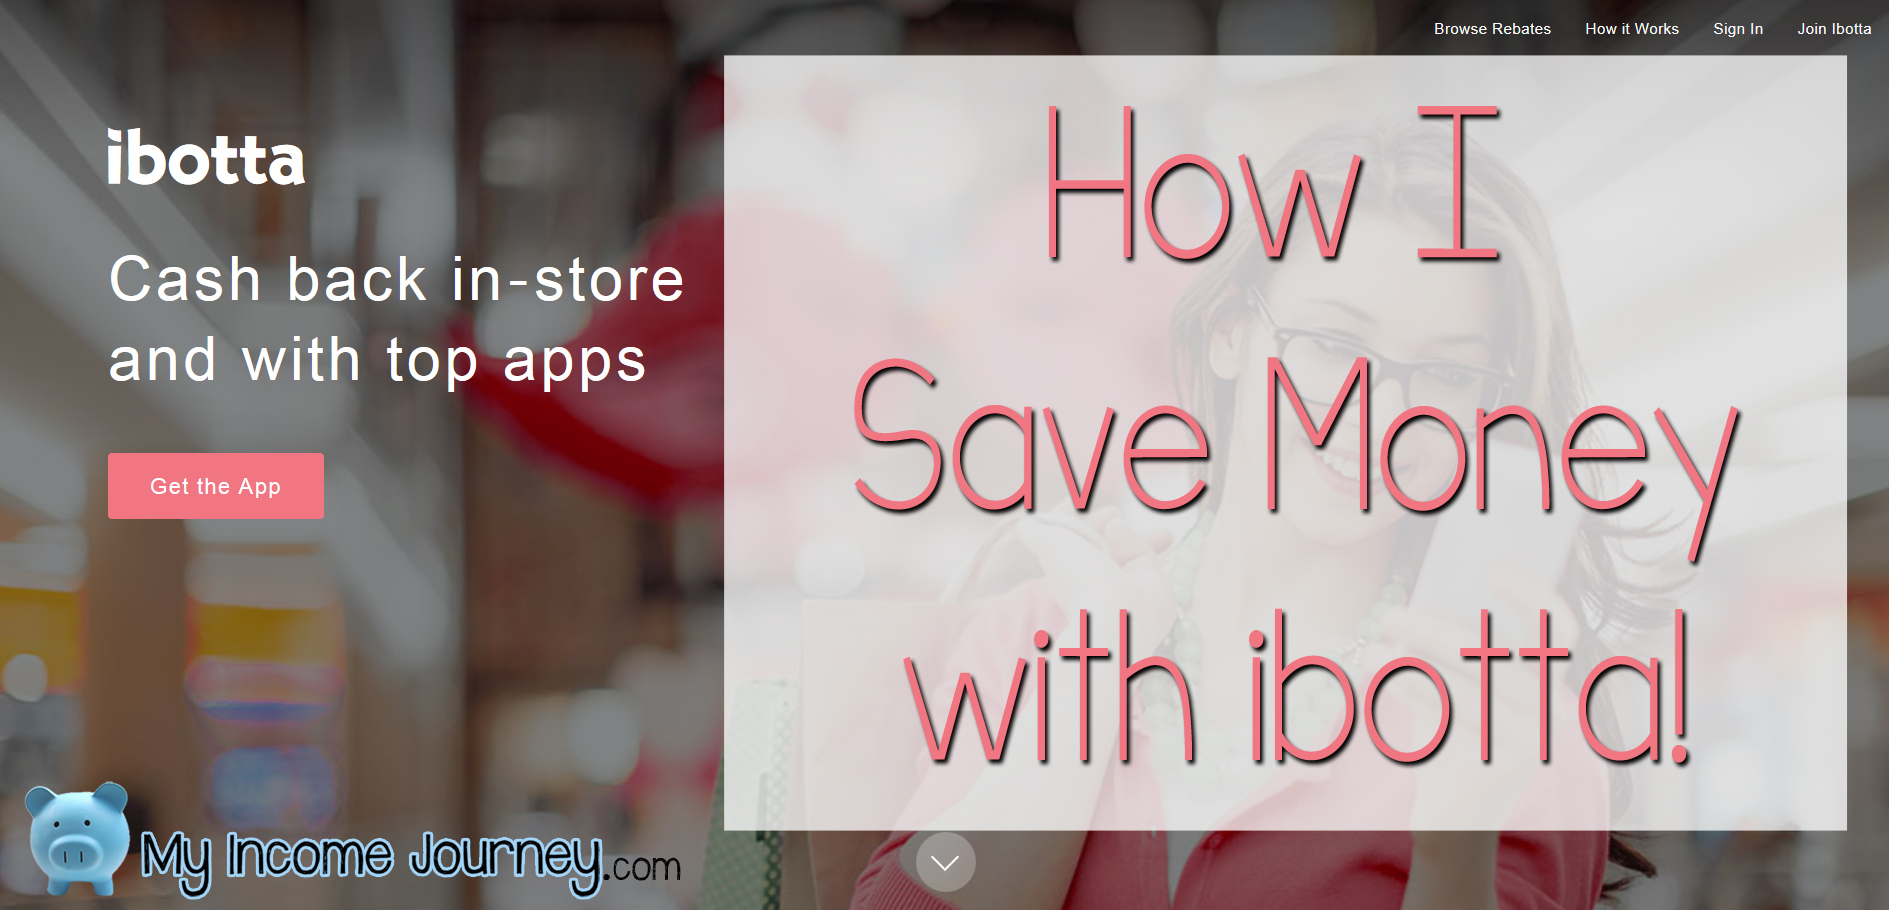 ibotta Review – How I Use ibotta to Save Money on Groceries